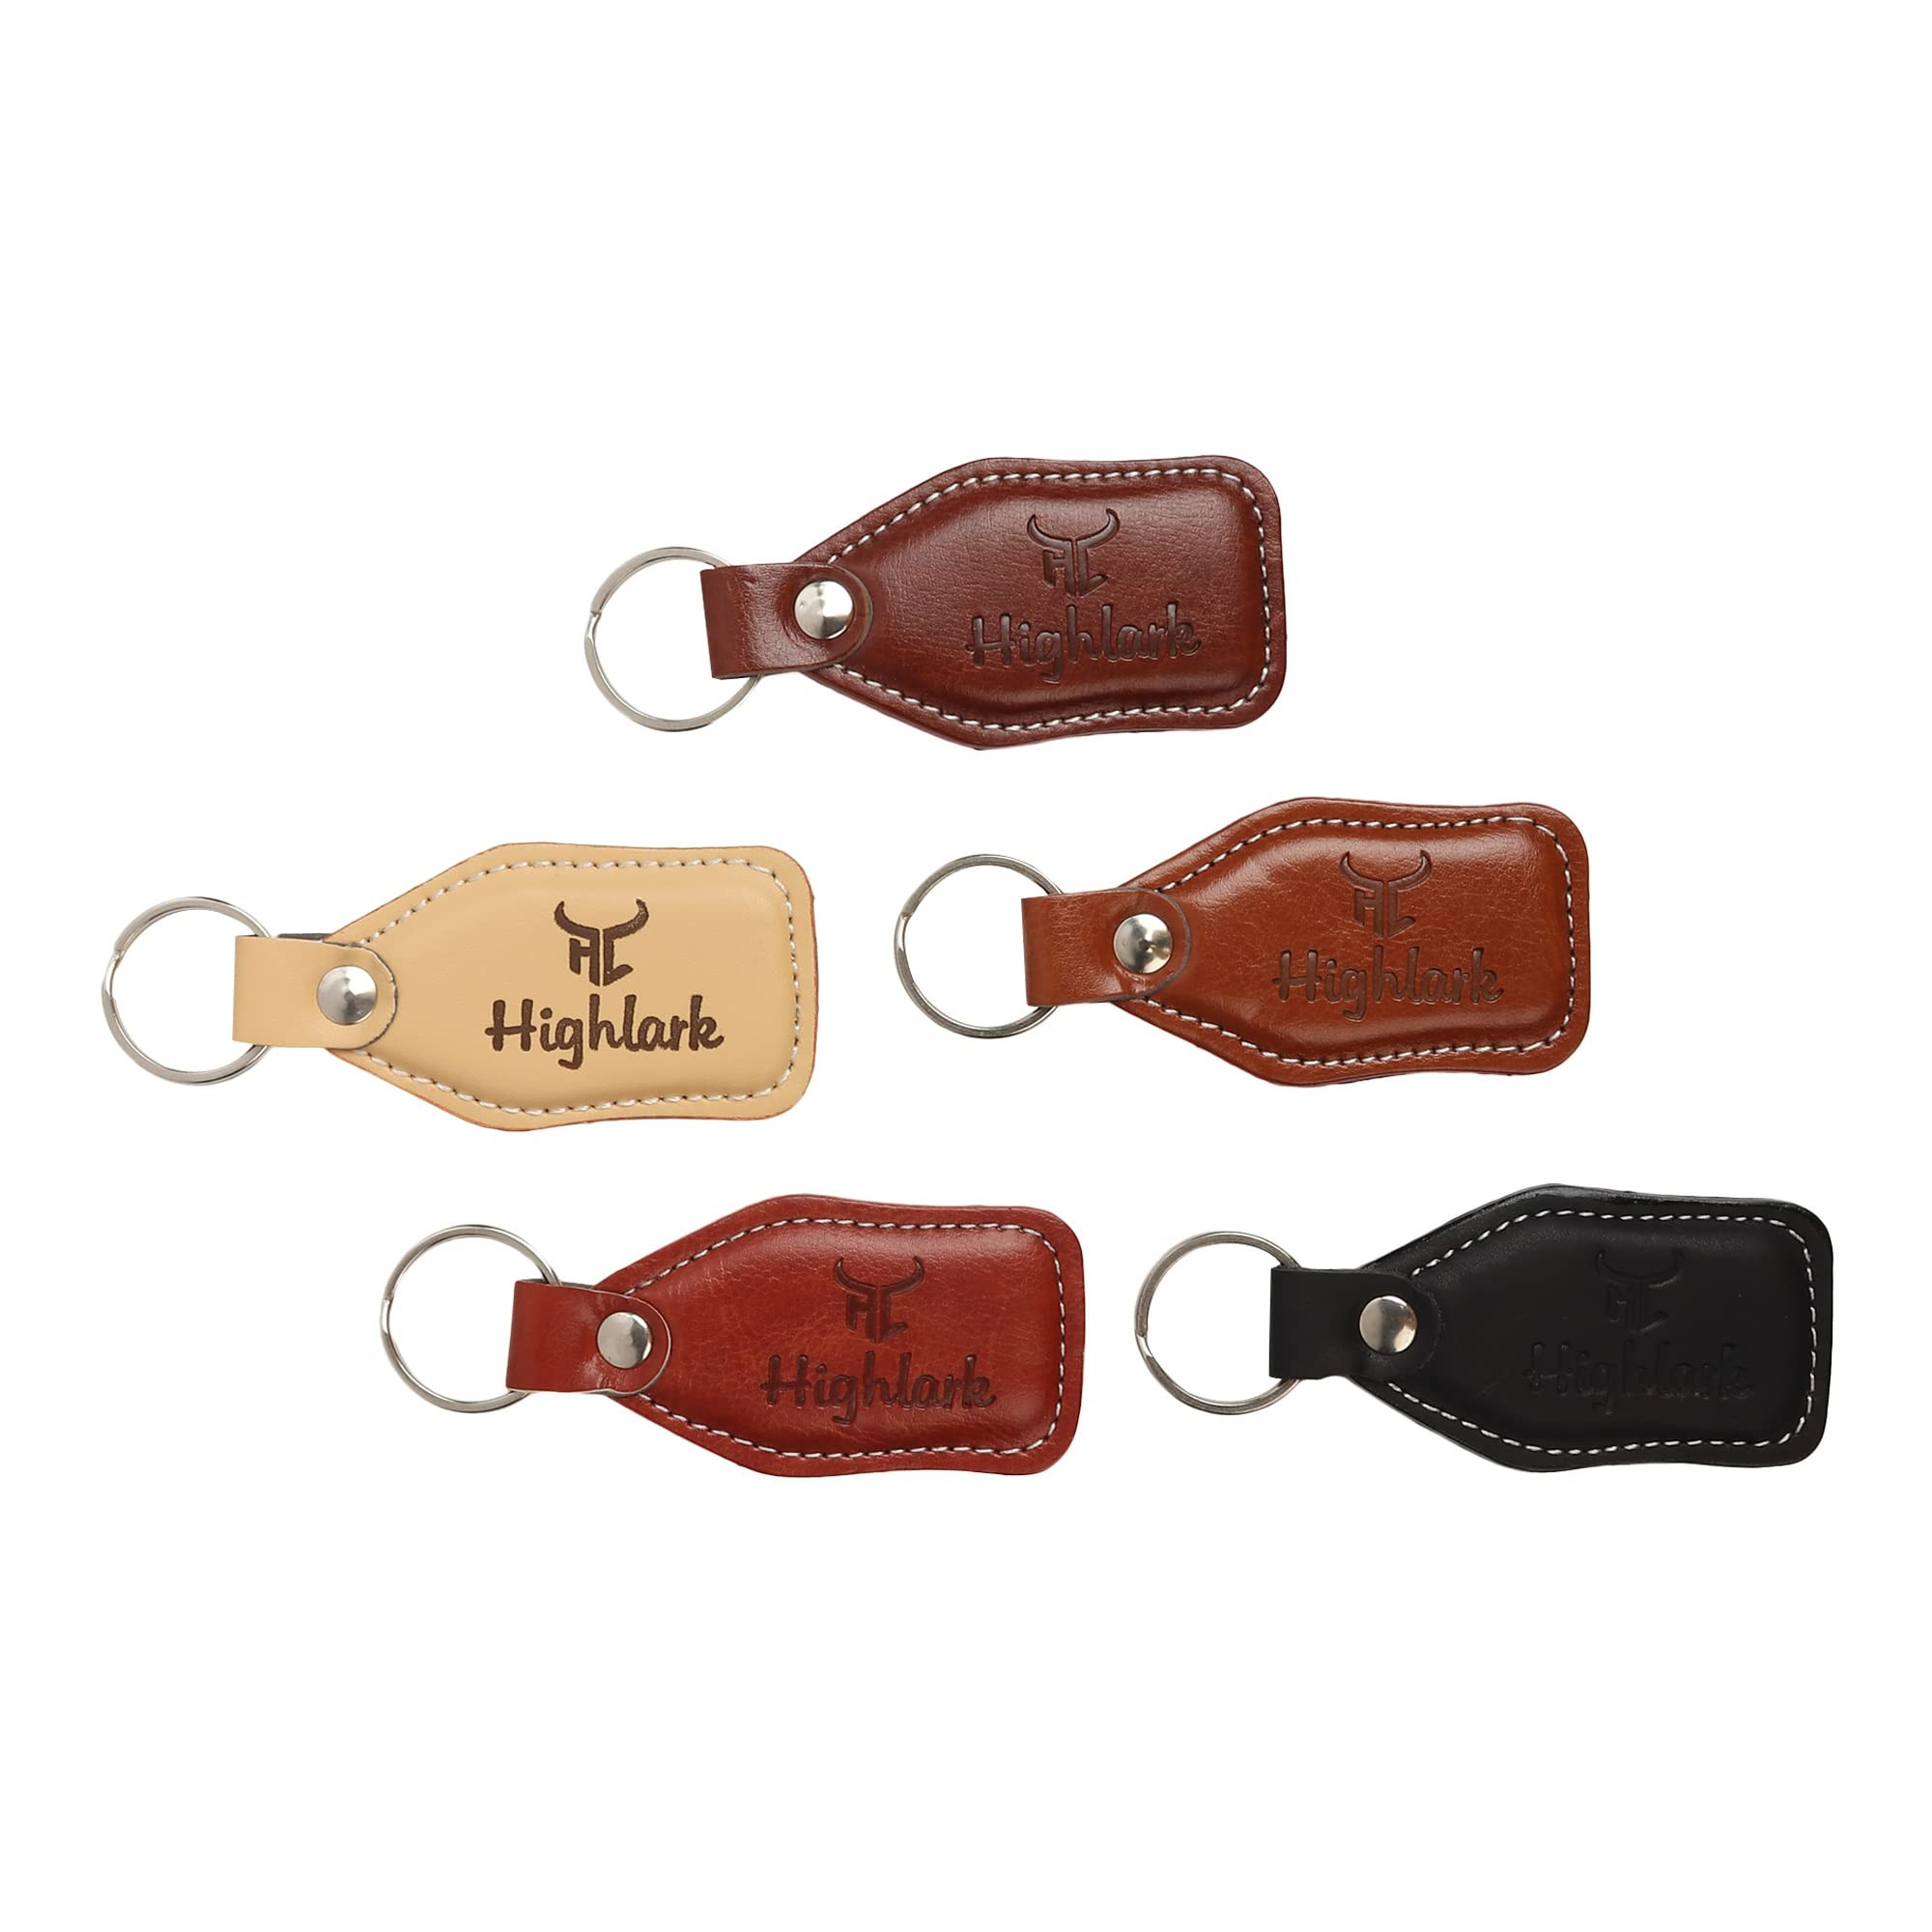 Leather Key Ring Leather Key Fob Leather Keychain Bike Rider Gift Bicycle  Gears Cyclist Gift Bike Gift Gift for Cyclist - Etsy